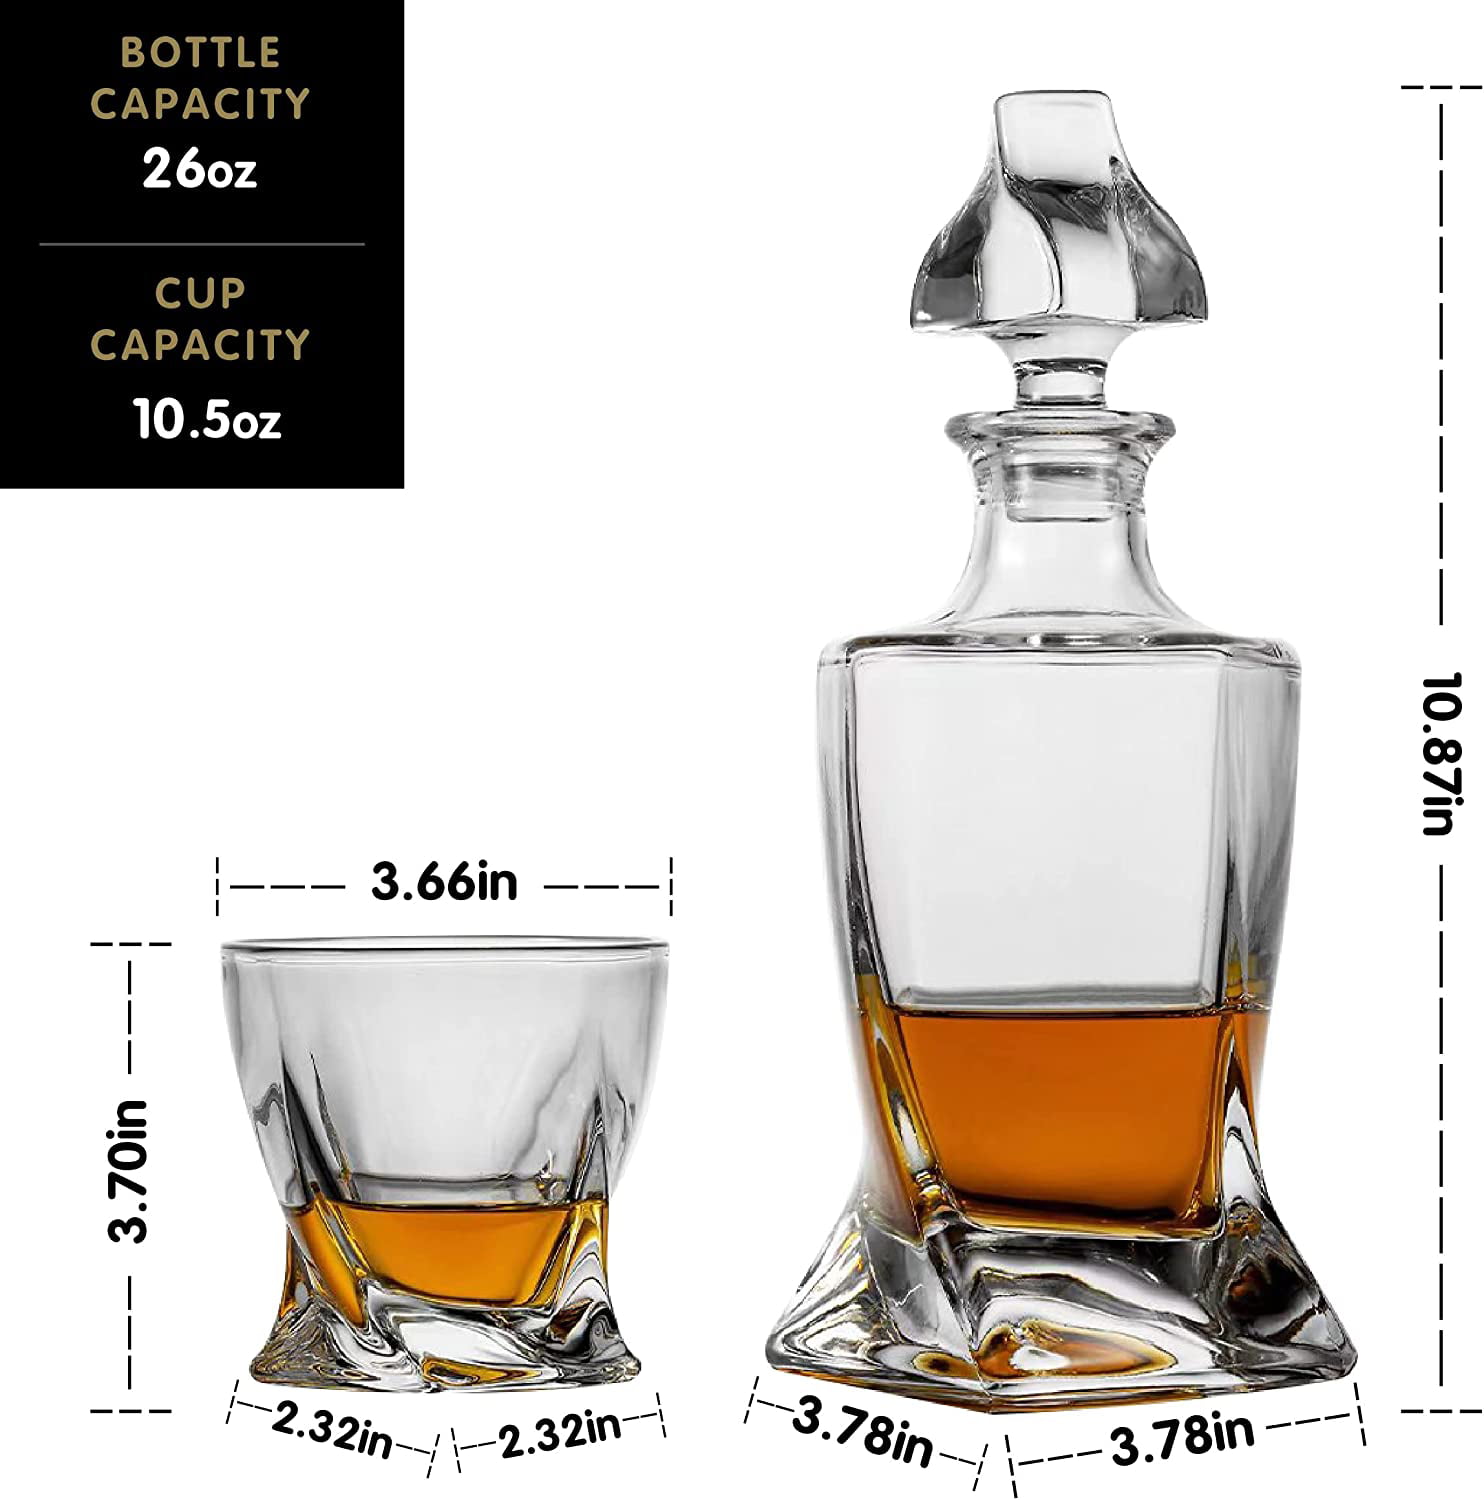 Yingluo Transparent Creative Whiskey Decanter Set With 4  Glasses,Flask Carefe,Whiskey Carafe for  Wine,Scotch,Bourbon,vodka,Liquor-750ml Gifts for Men (1 DECANTER + 4  GLASSES): Liquor Decanters